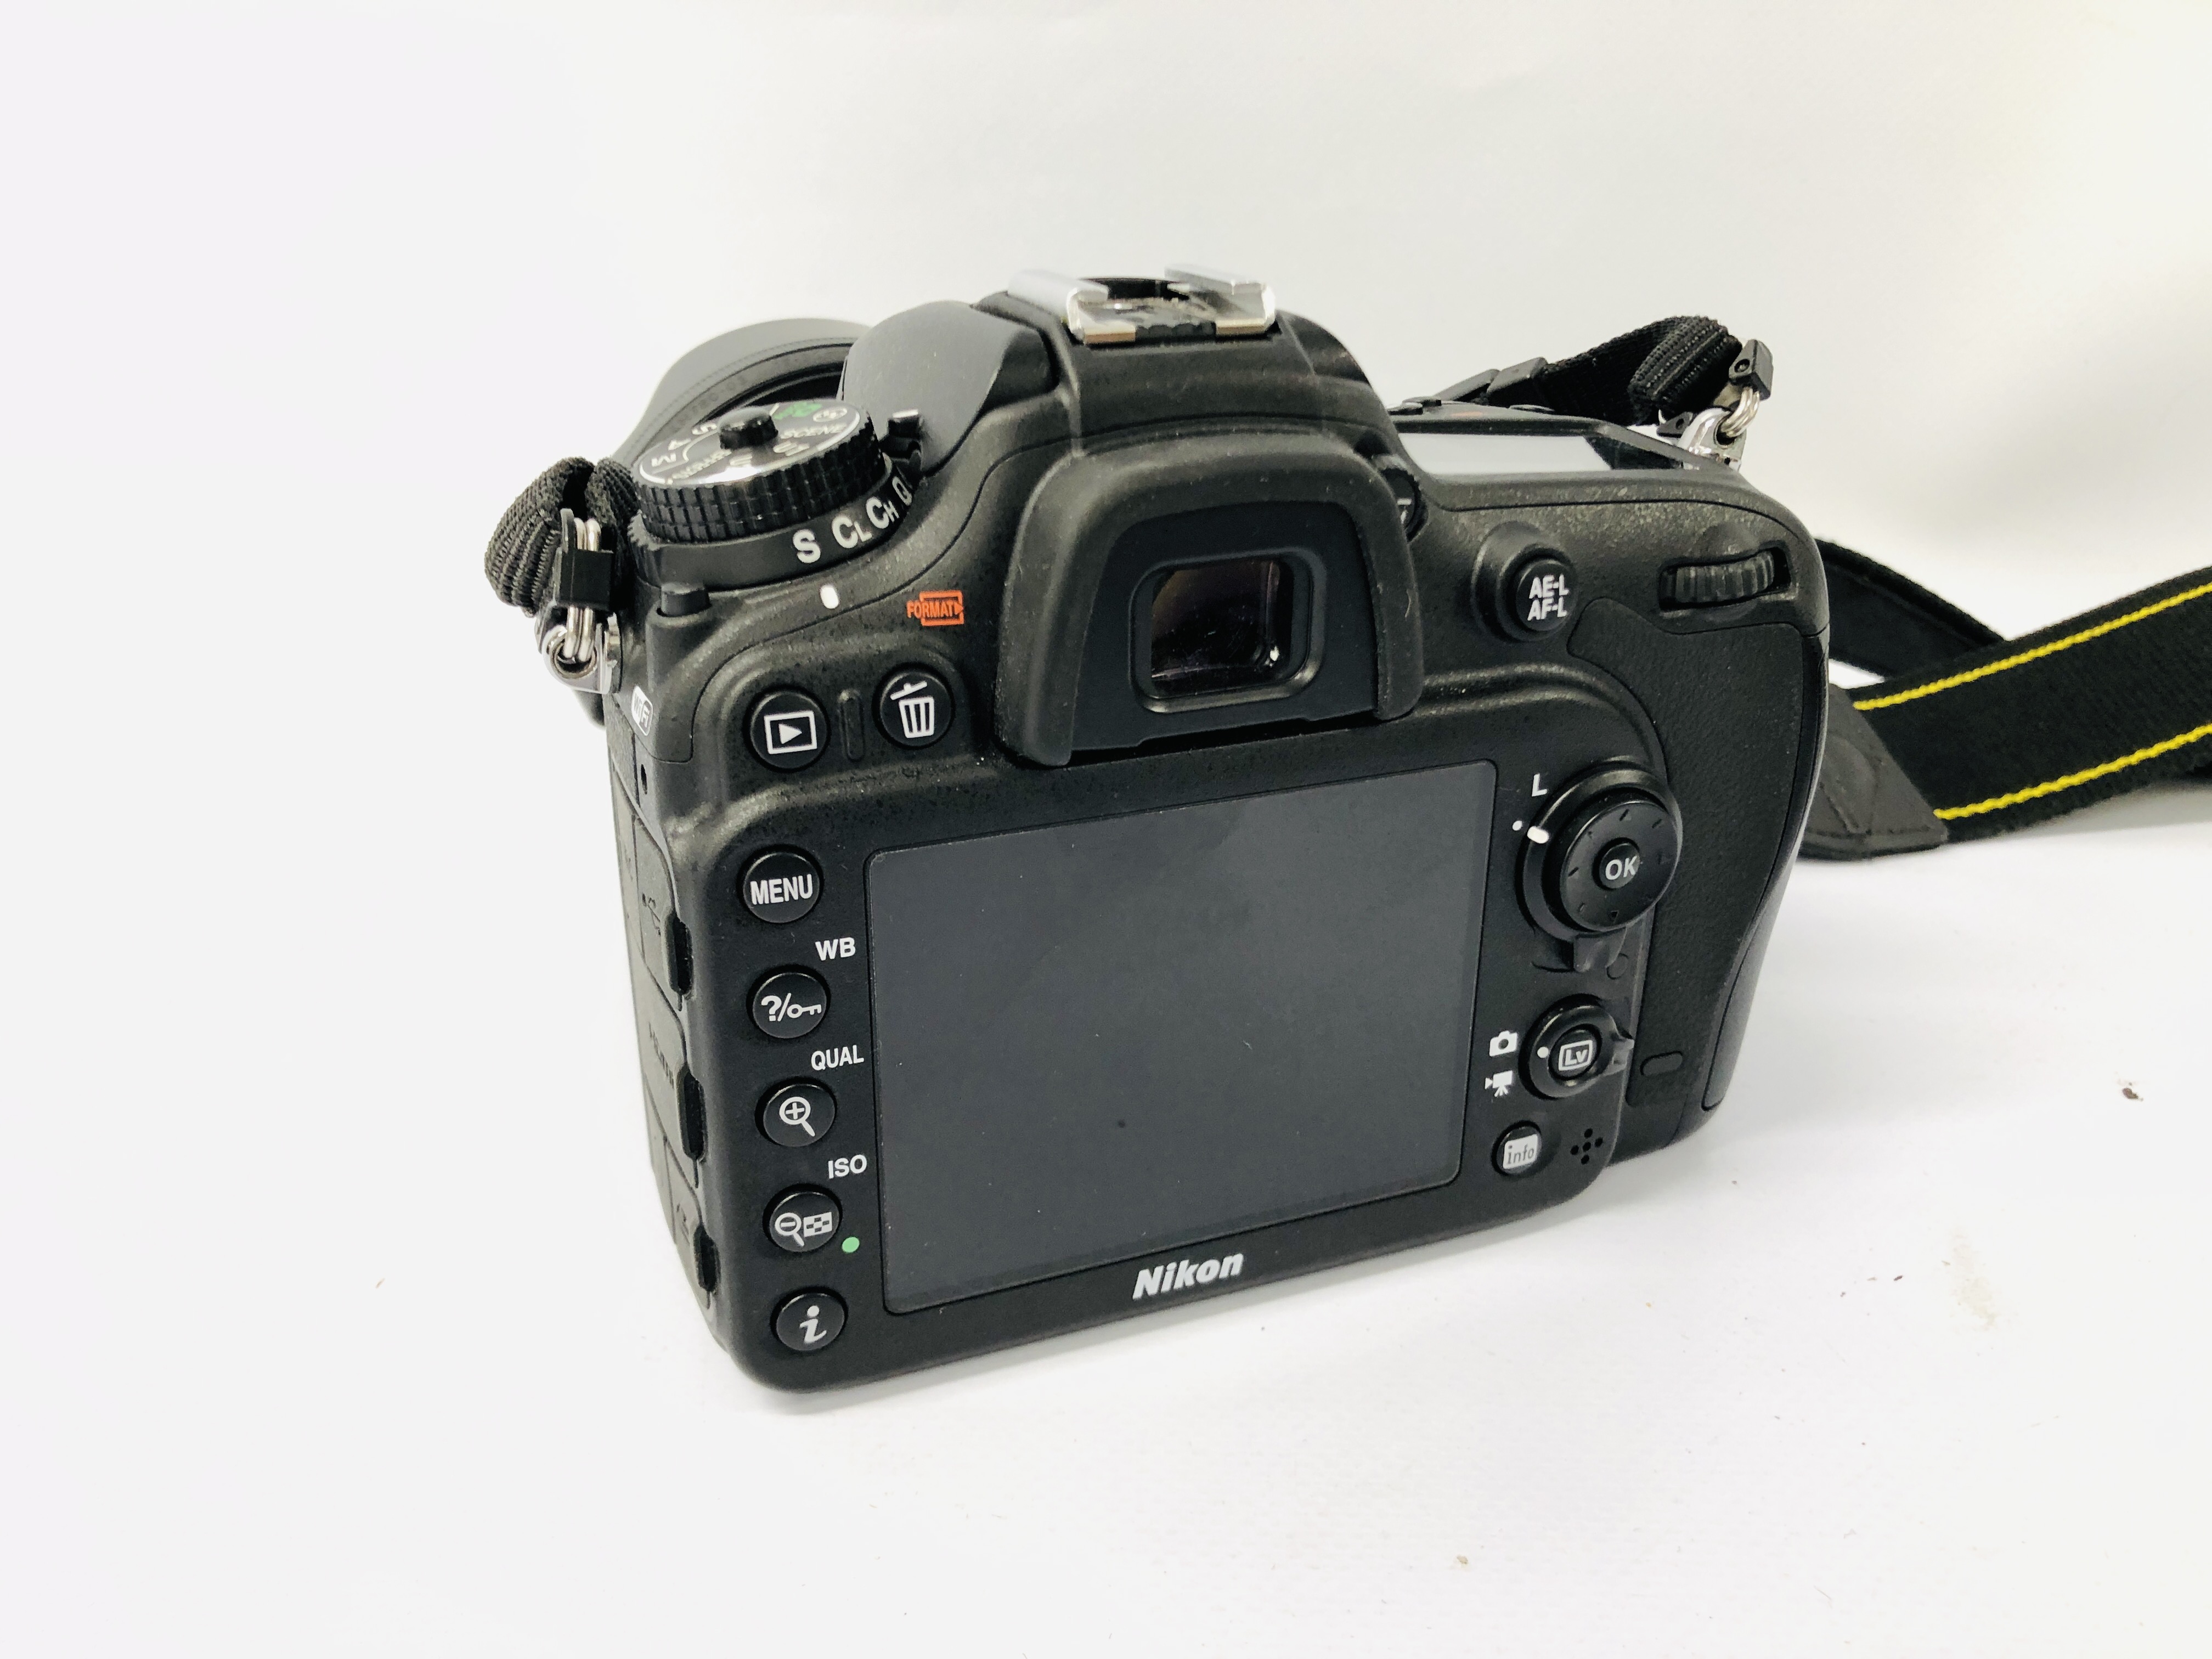 NIKON D7200 DIGITAL SLR CAMERA BODY FITTED WITH SIGMA 17-70 MM LENS S/N 9443071 - SOLD AS SEEN. - Image 5 of 5